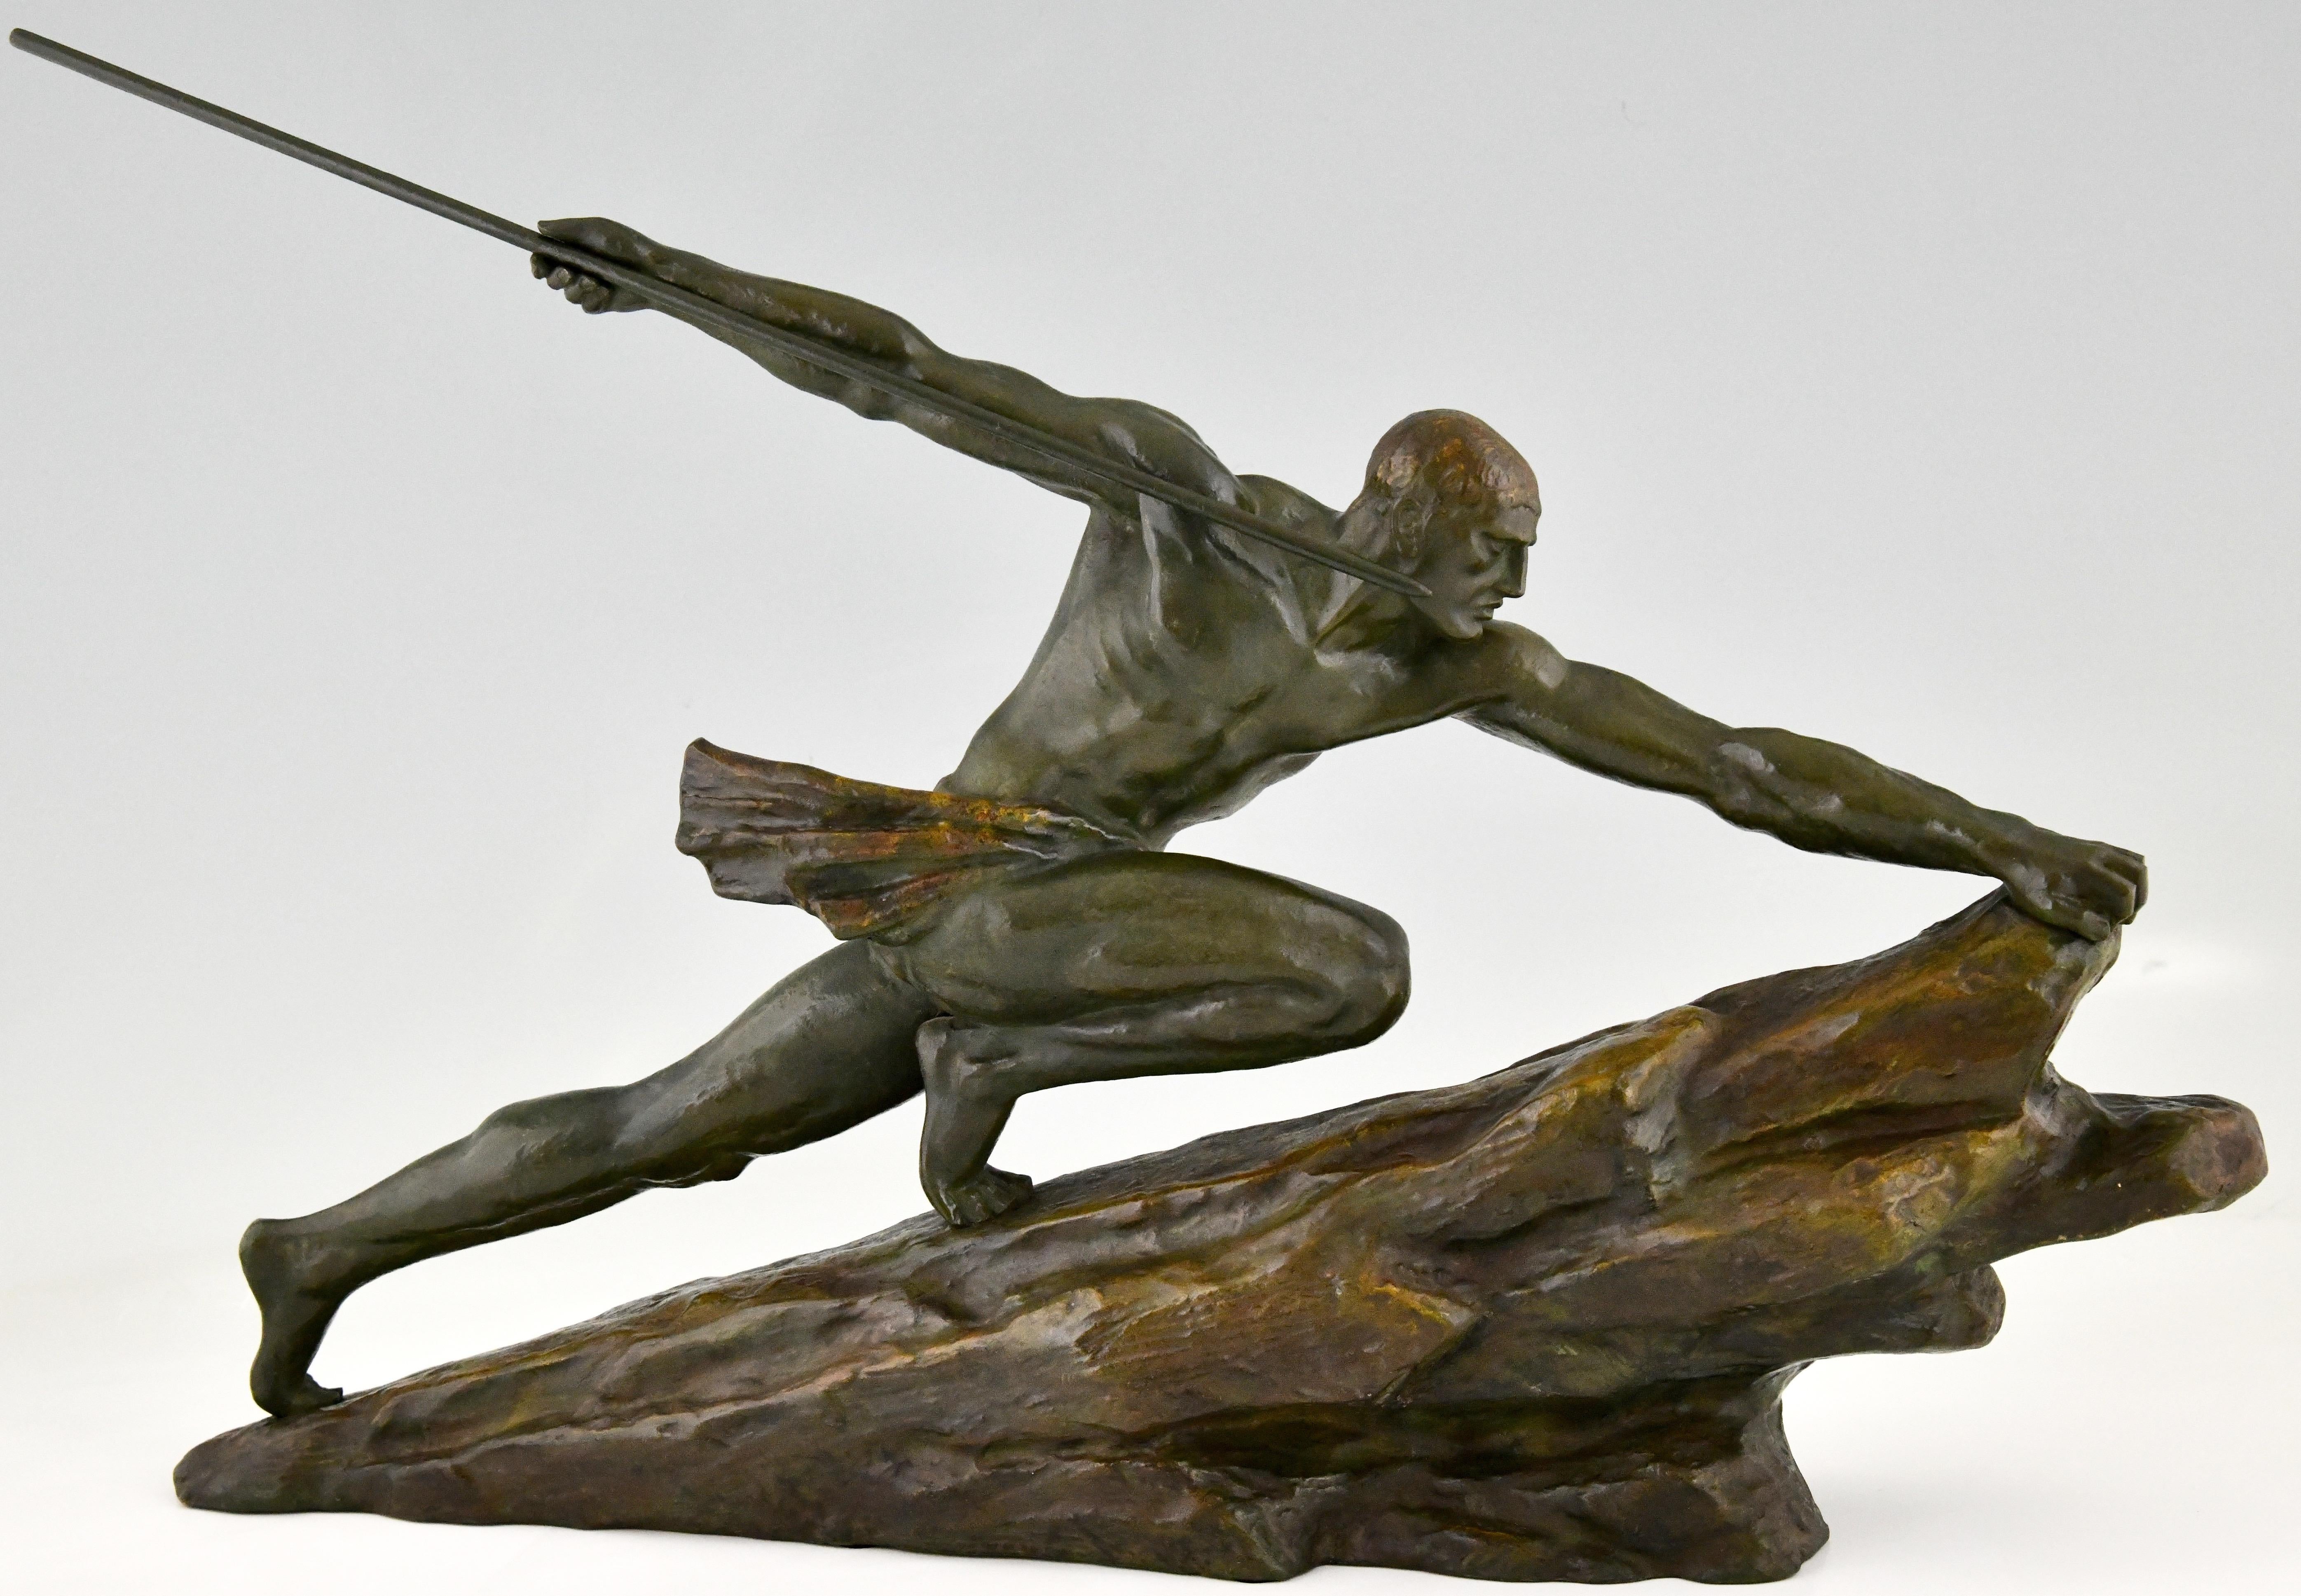 Art Deco bronze sculpture athlete with spear signed by Pierre Le Faguays marked bronze and numbered.
The sculpture has a rich green patina with shades of brown.
France 1927.
This bronze is illustrated on page 425 of the book: Bronzes, sculptors